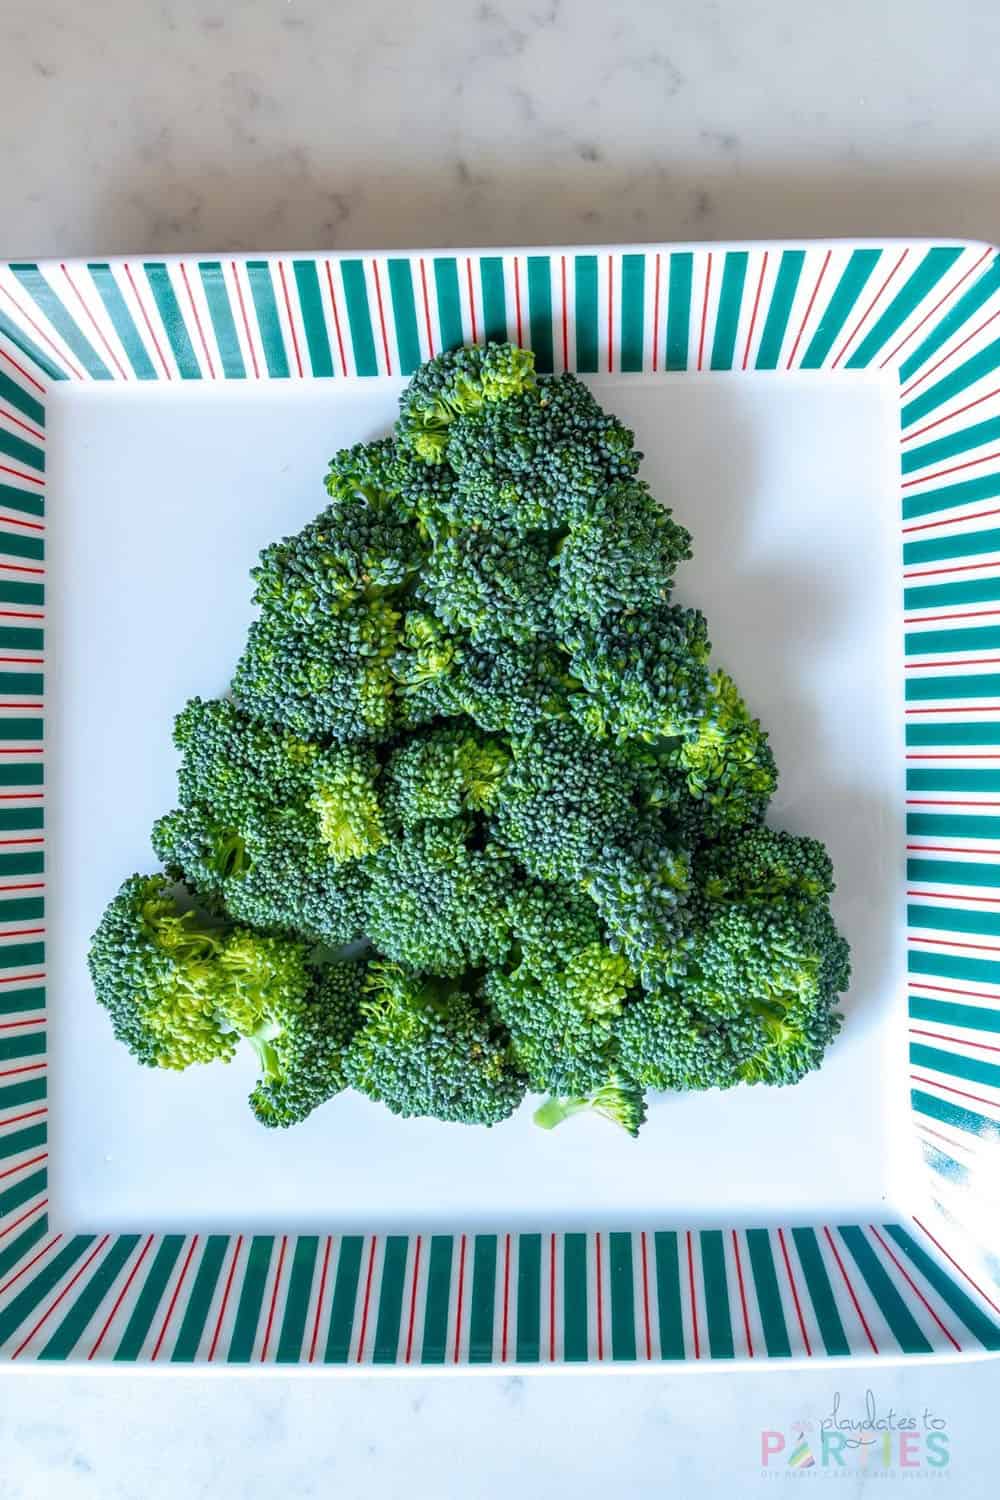 Christmas Tree Veggie Platter Step 1: Arrange the broccoli in the shape of a triangle.